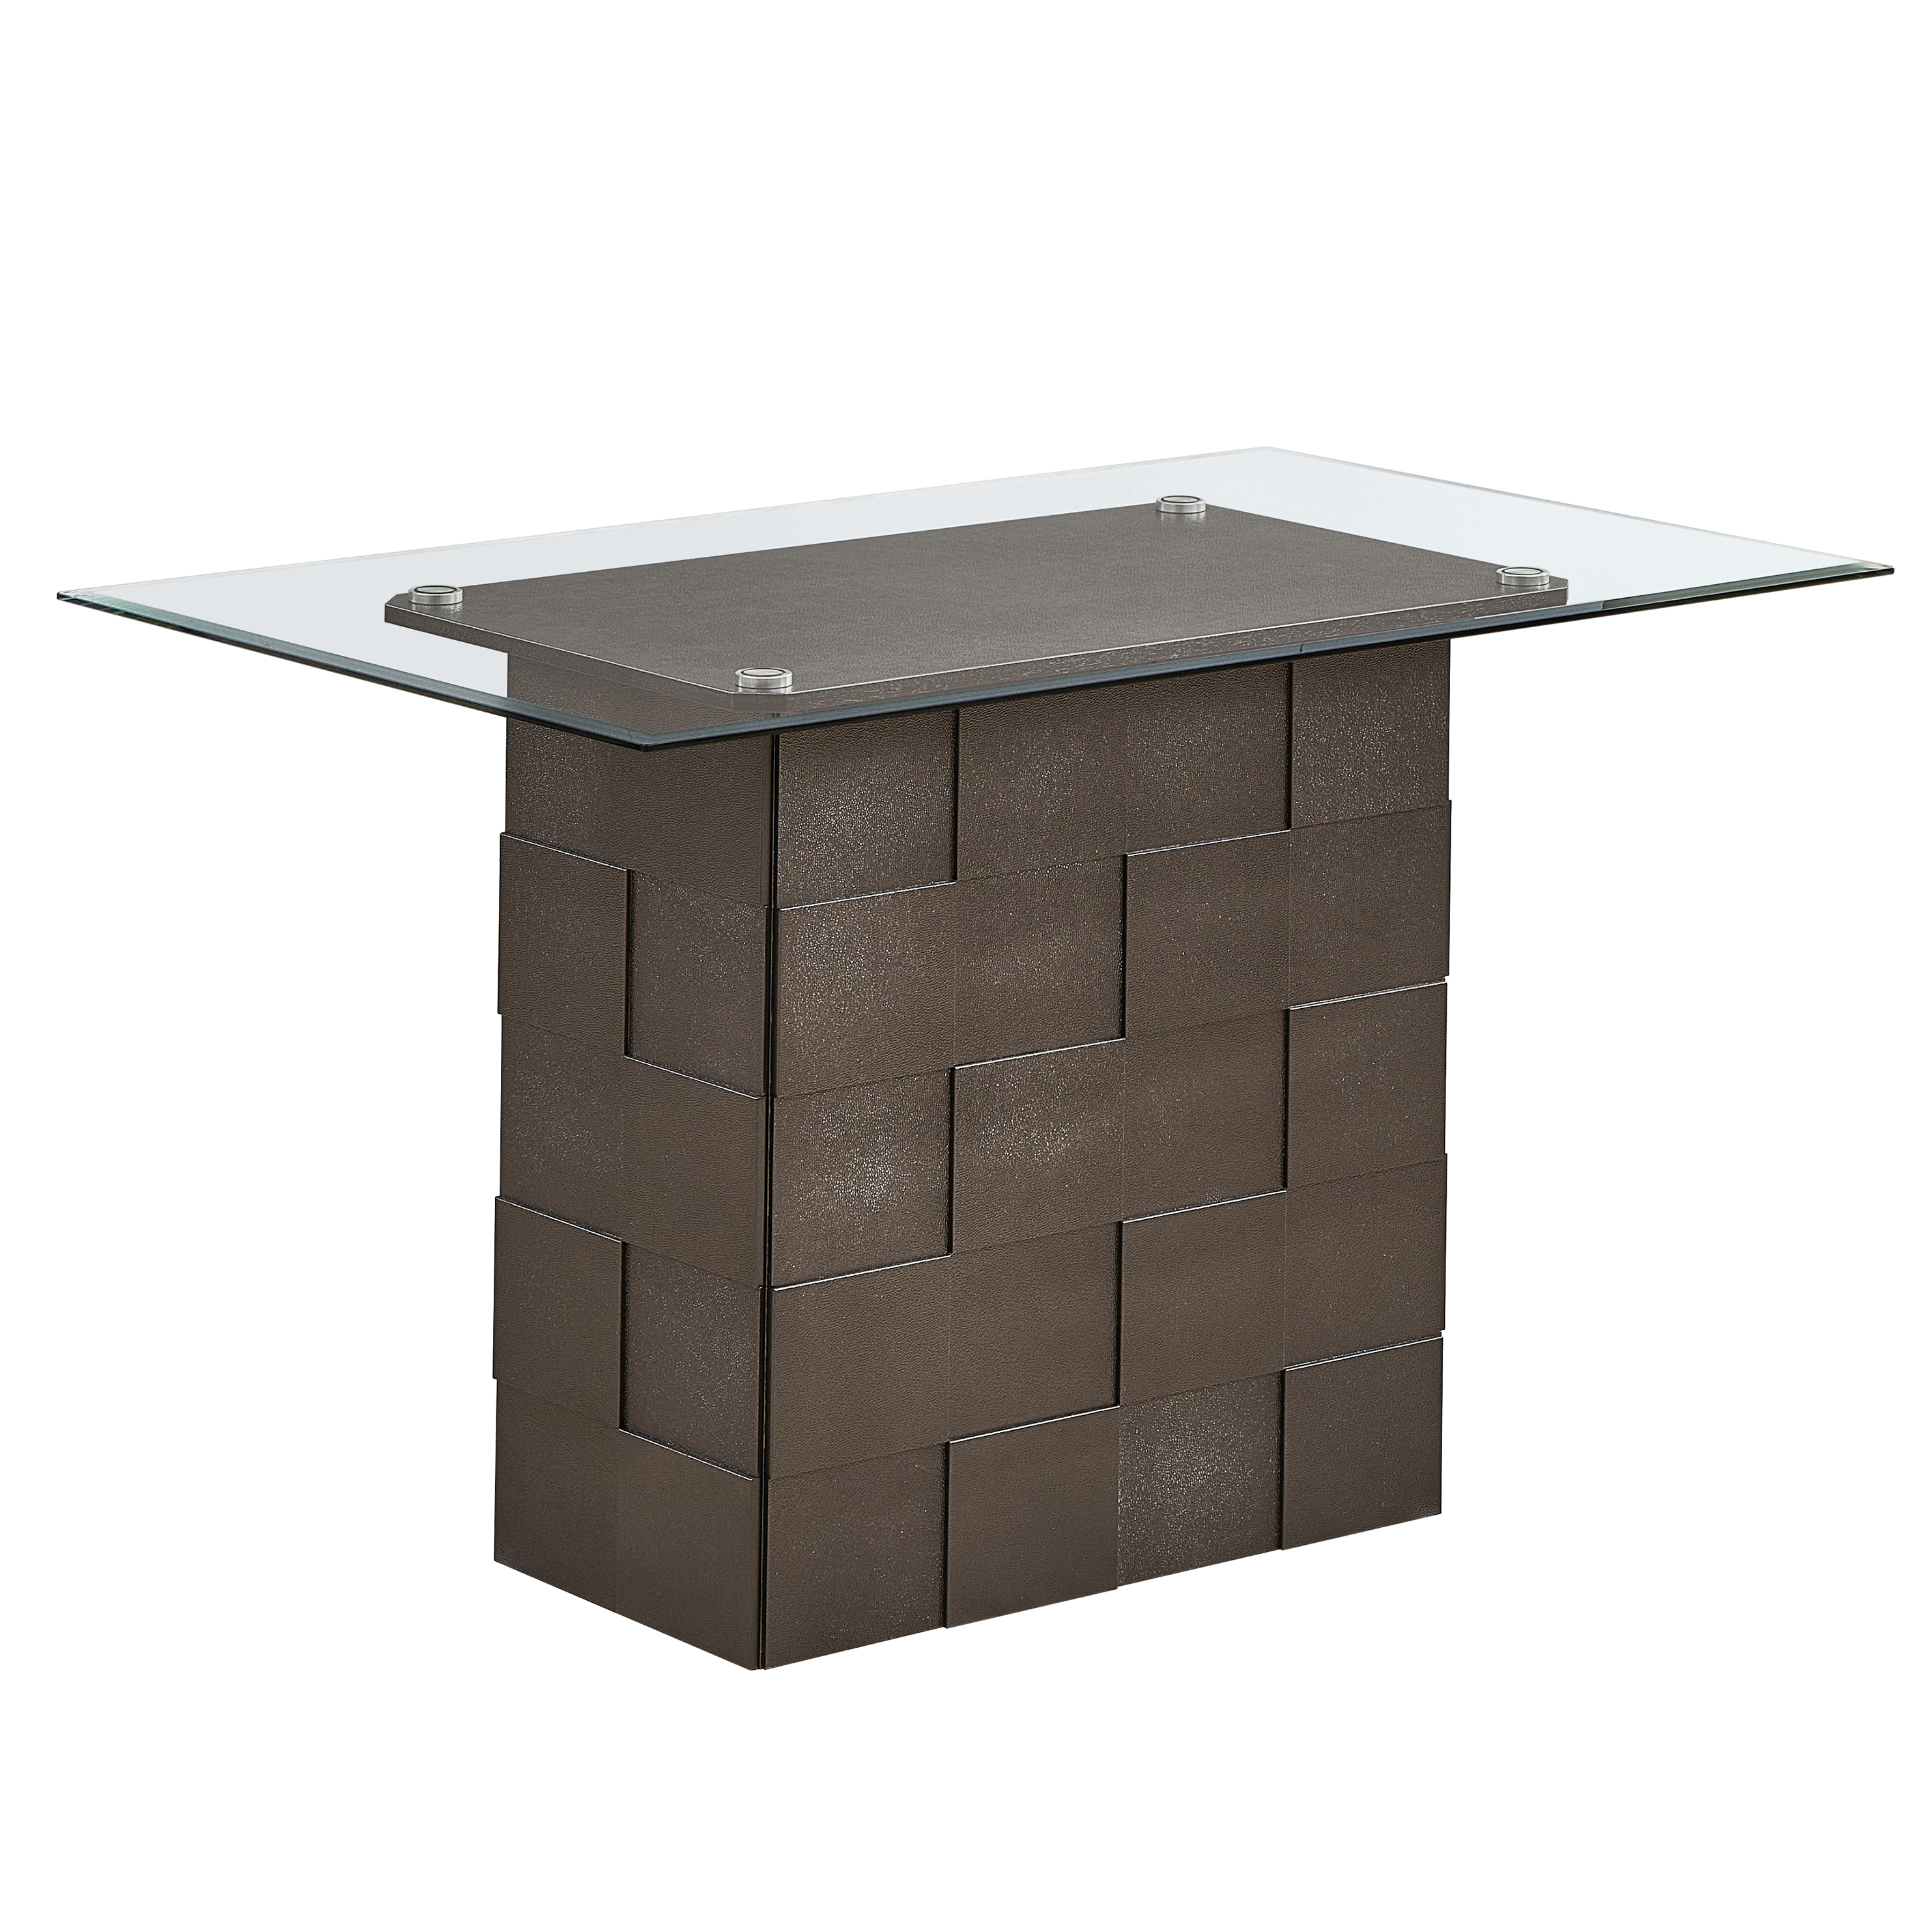 Baxter Counter Height Table